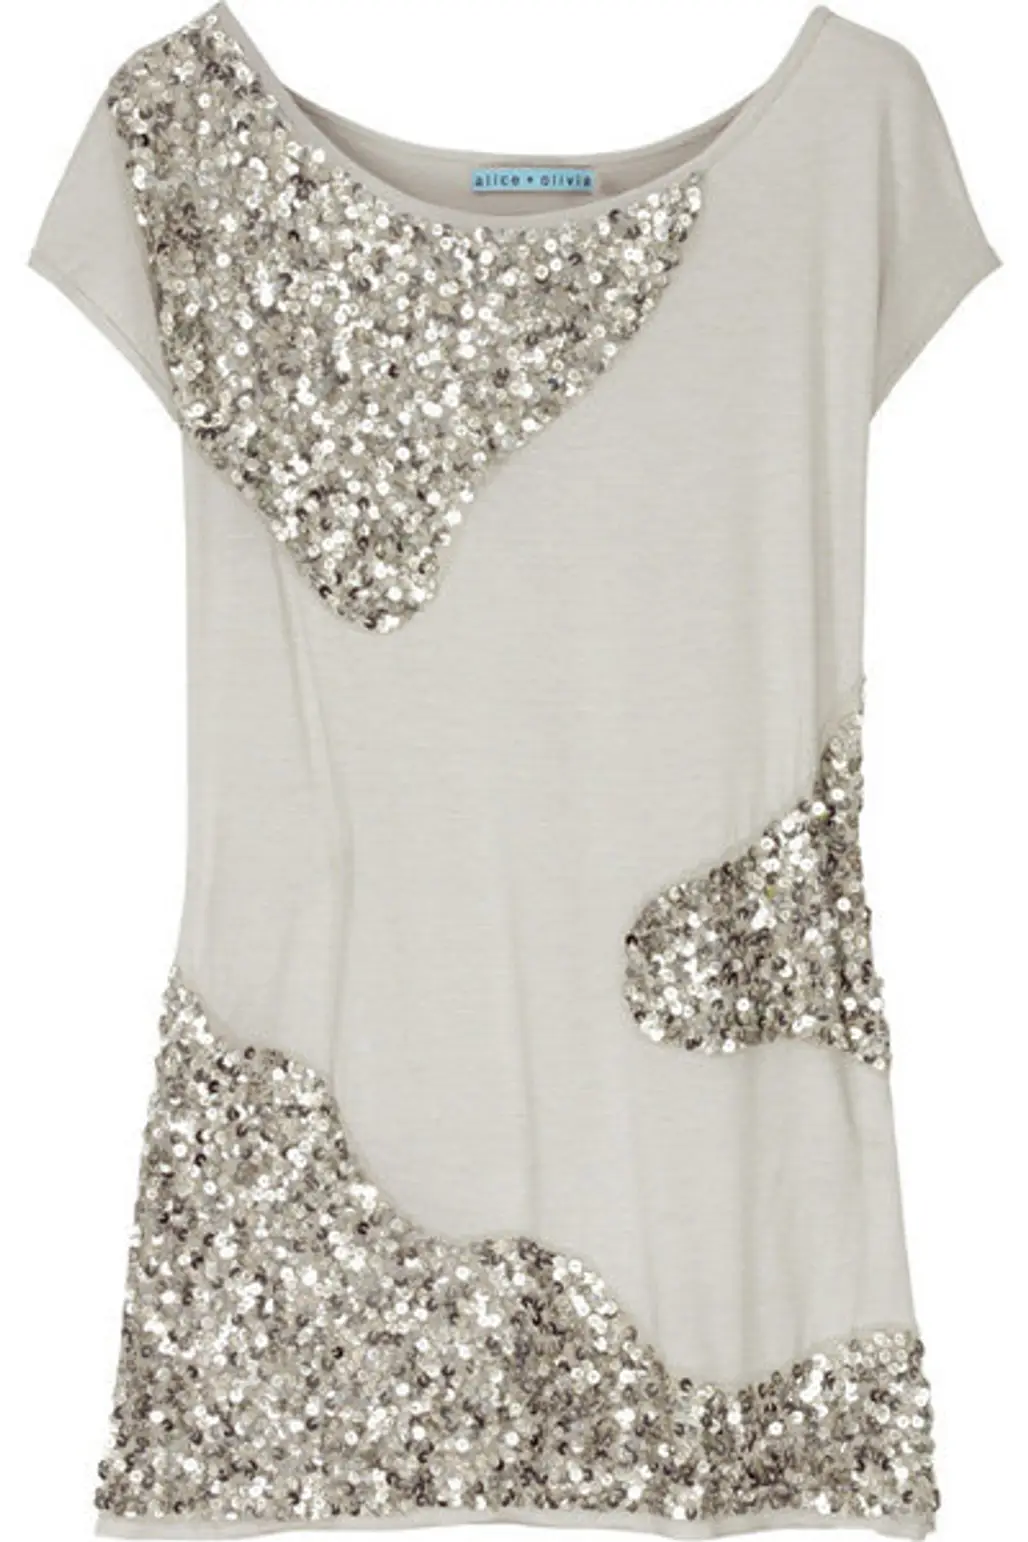 Alice + Olivia Sequined Jersey Top